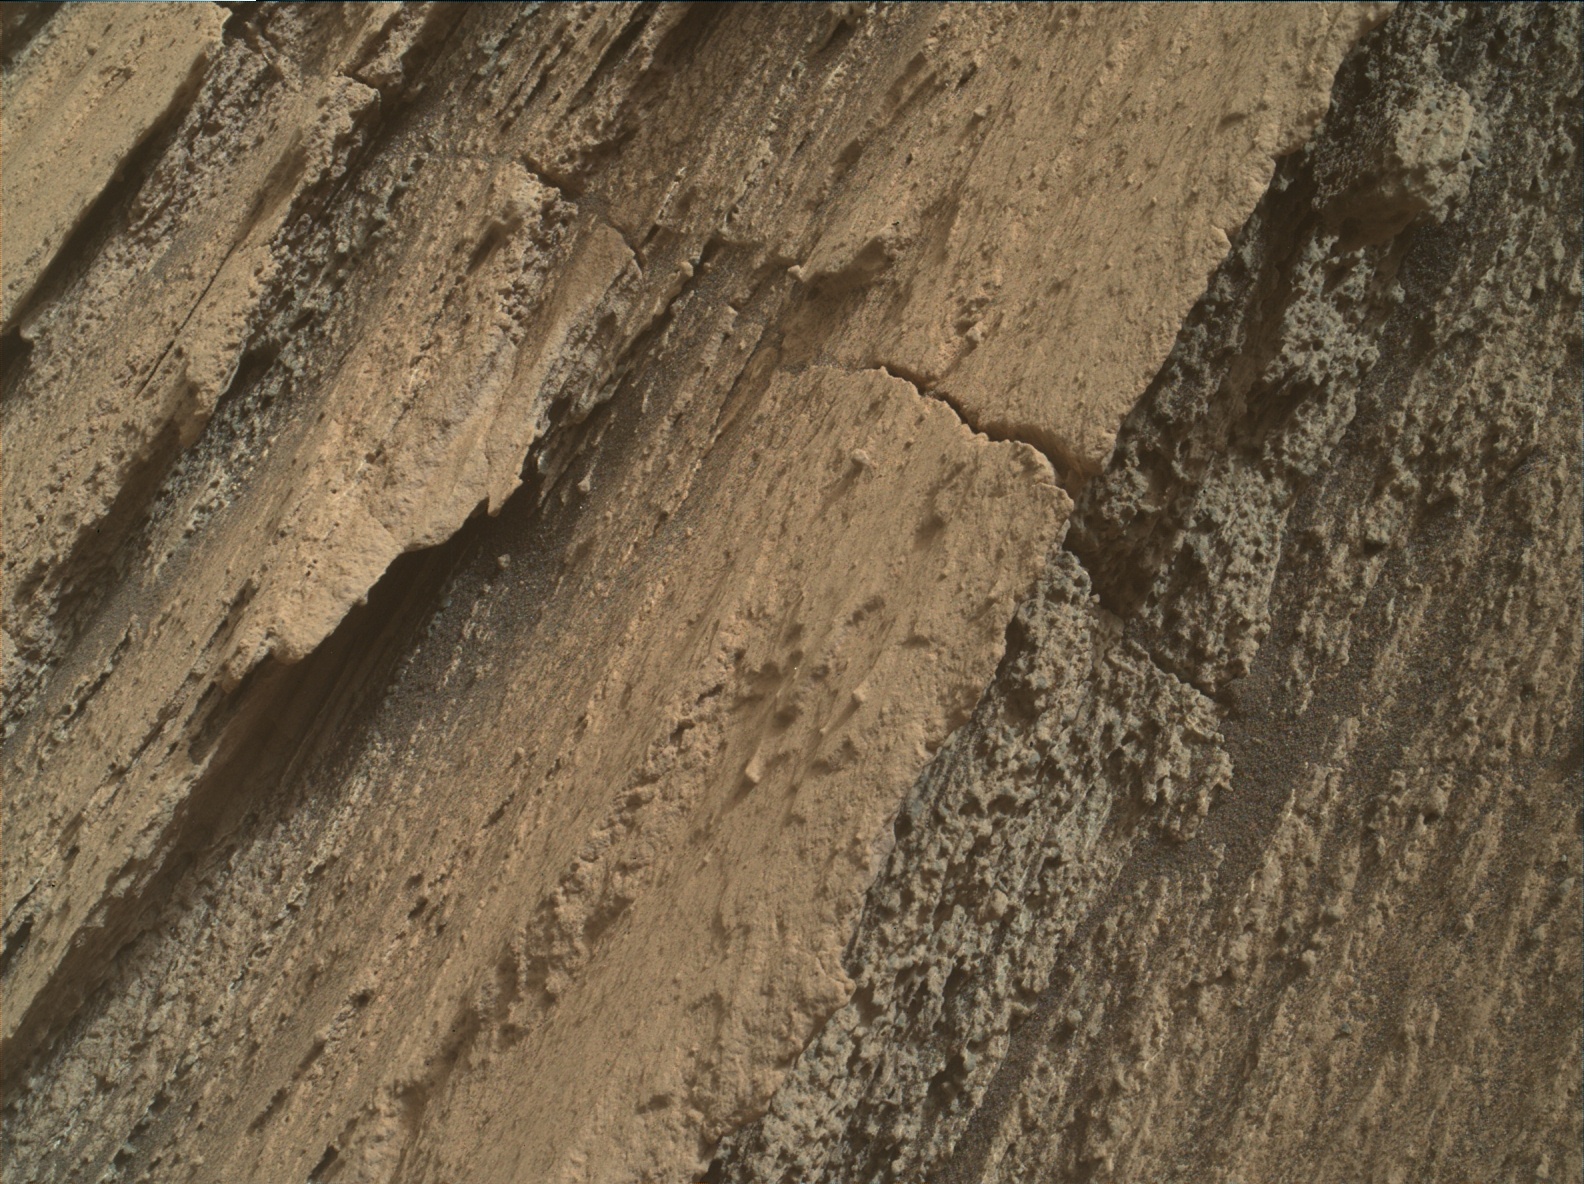 Nasa's Mars rover Curiosity acquired this image using its Mars Hand Lens Imager (MAHLI) on Sol 2582